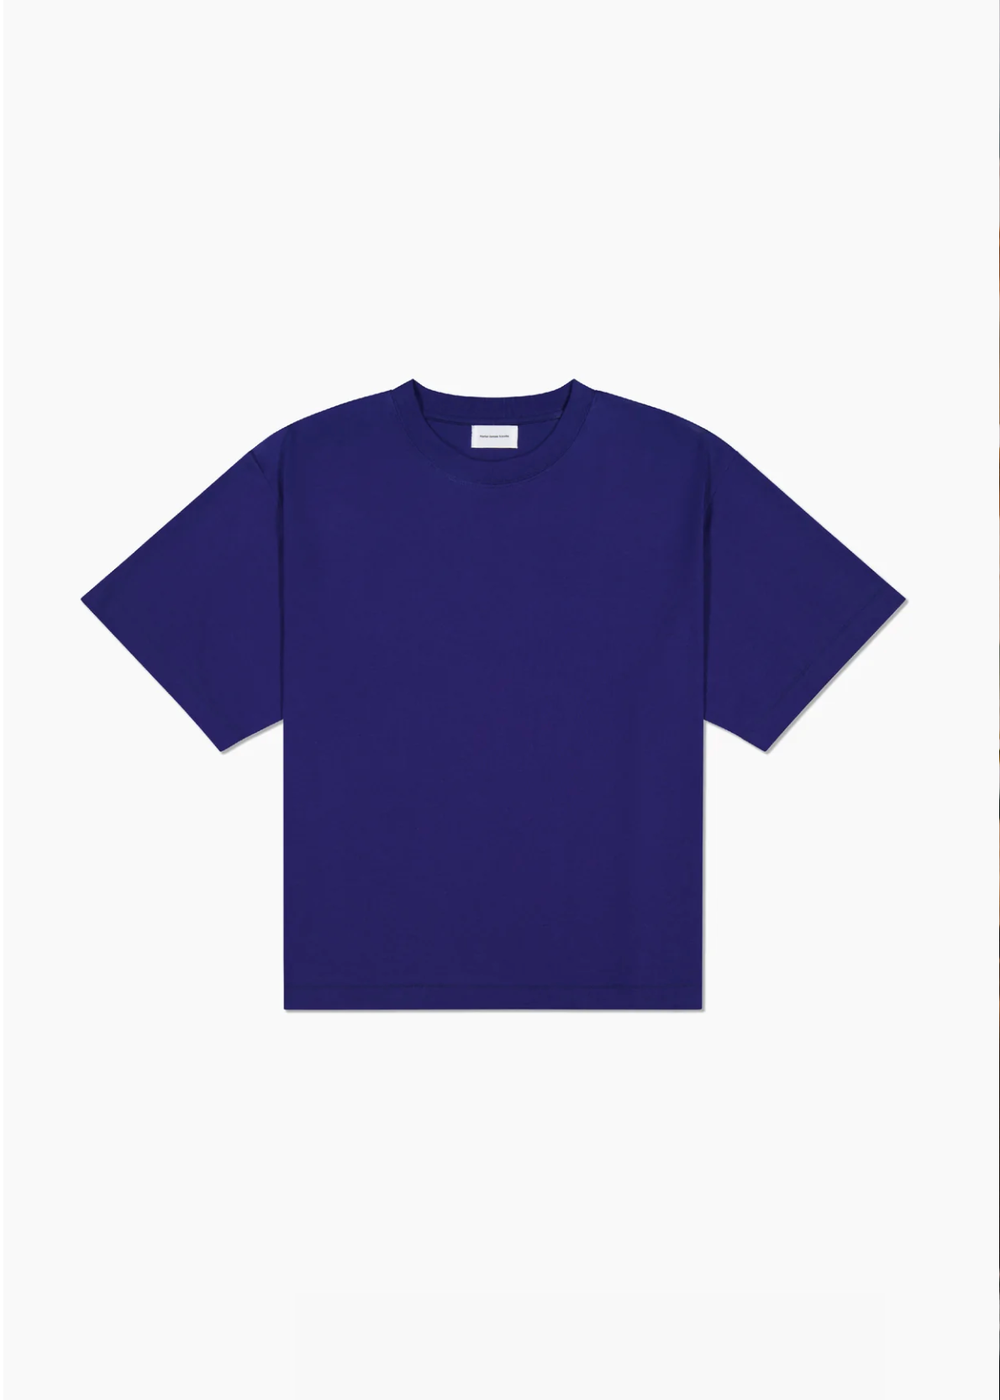 UNIFORM TEE BLUE | PORTER JAMES SPORTS | Mad About The Boy